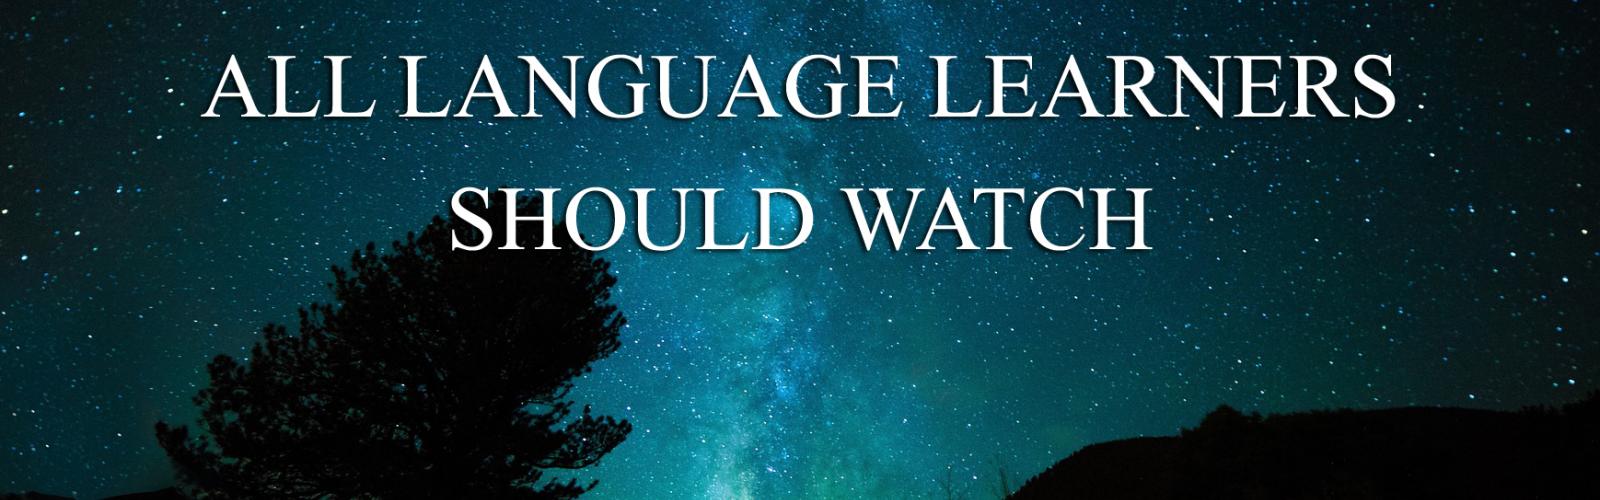 Top 5 TED talks every language learner should watch